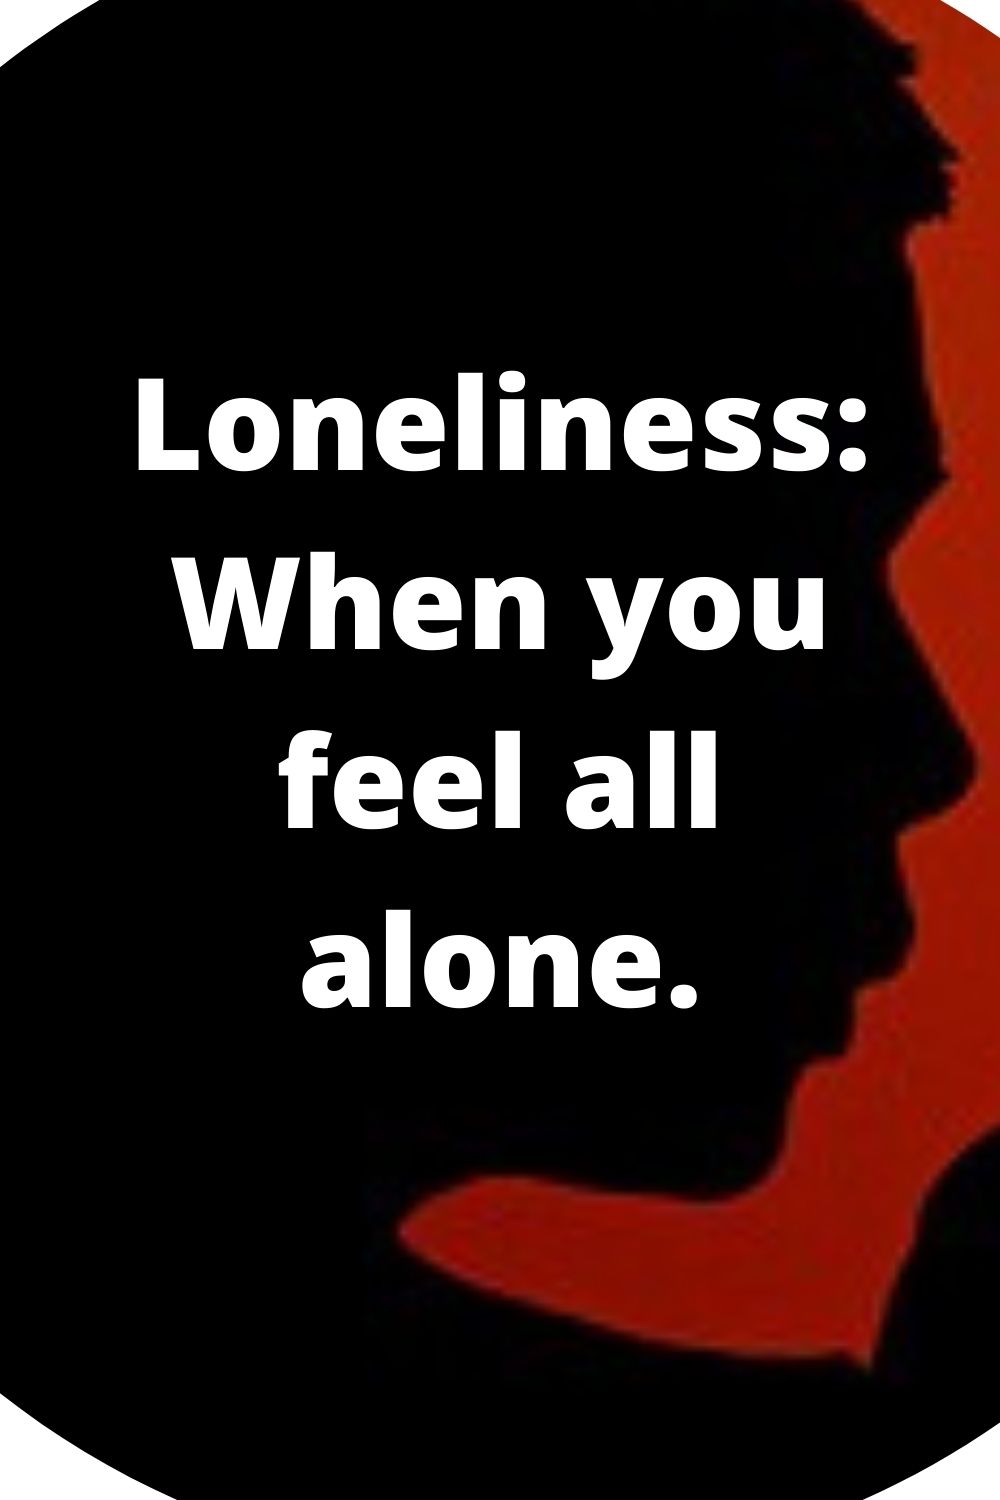 Loneliness: When you feel all alone.